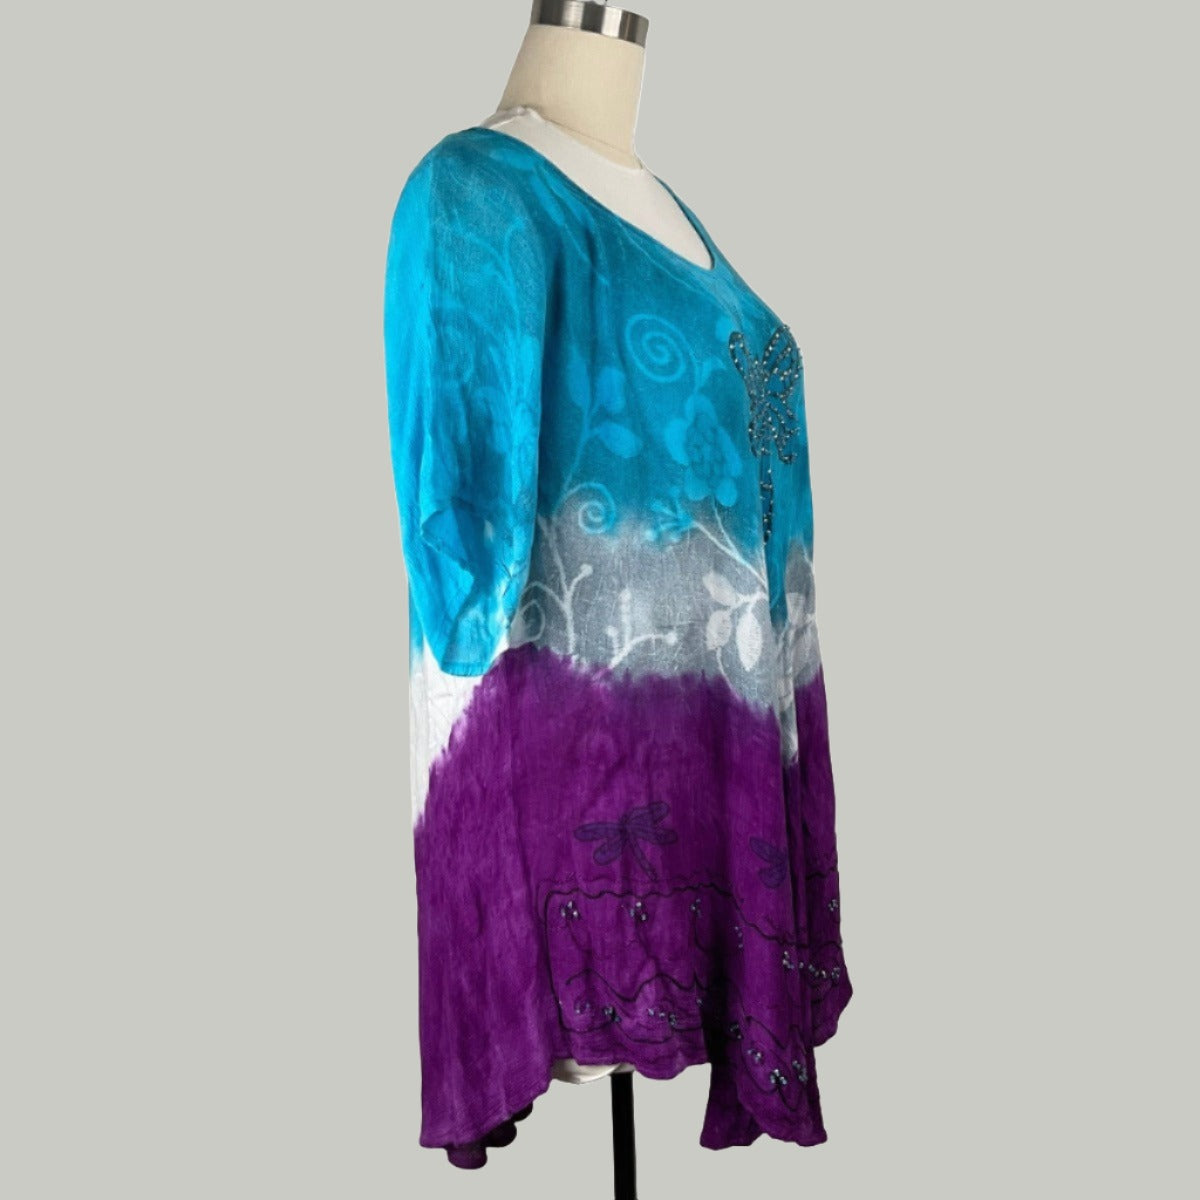 Women's Tunic Blouse - Purple & Light Blue Dragonfly - PLUS SIZE - Right Side View